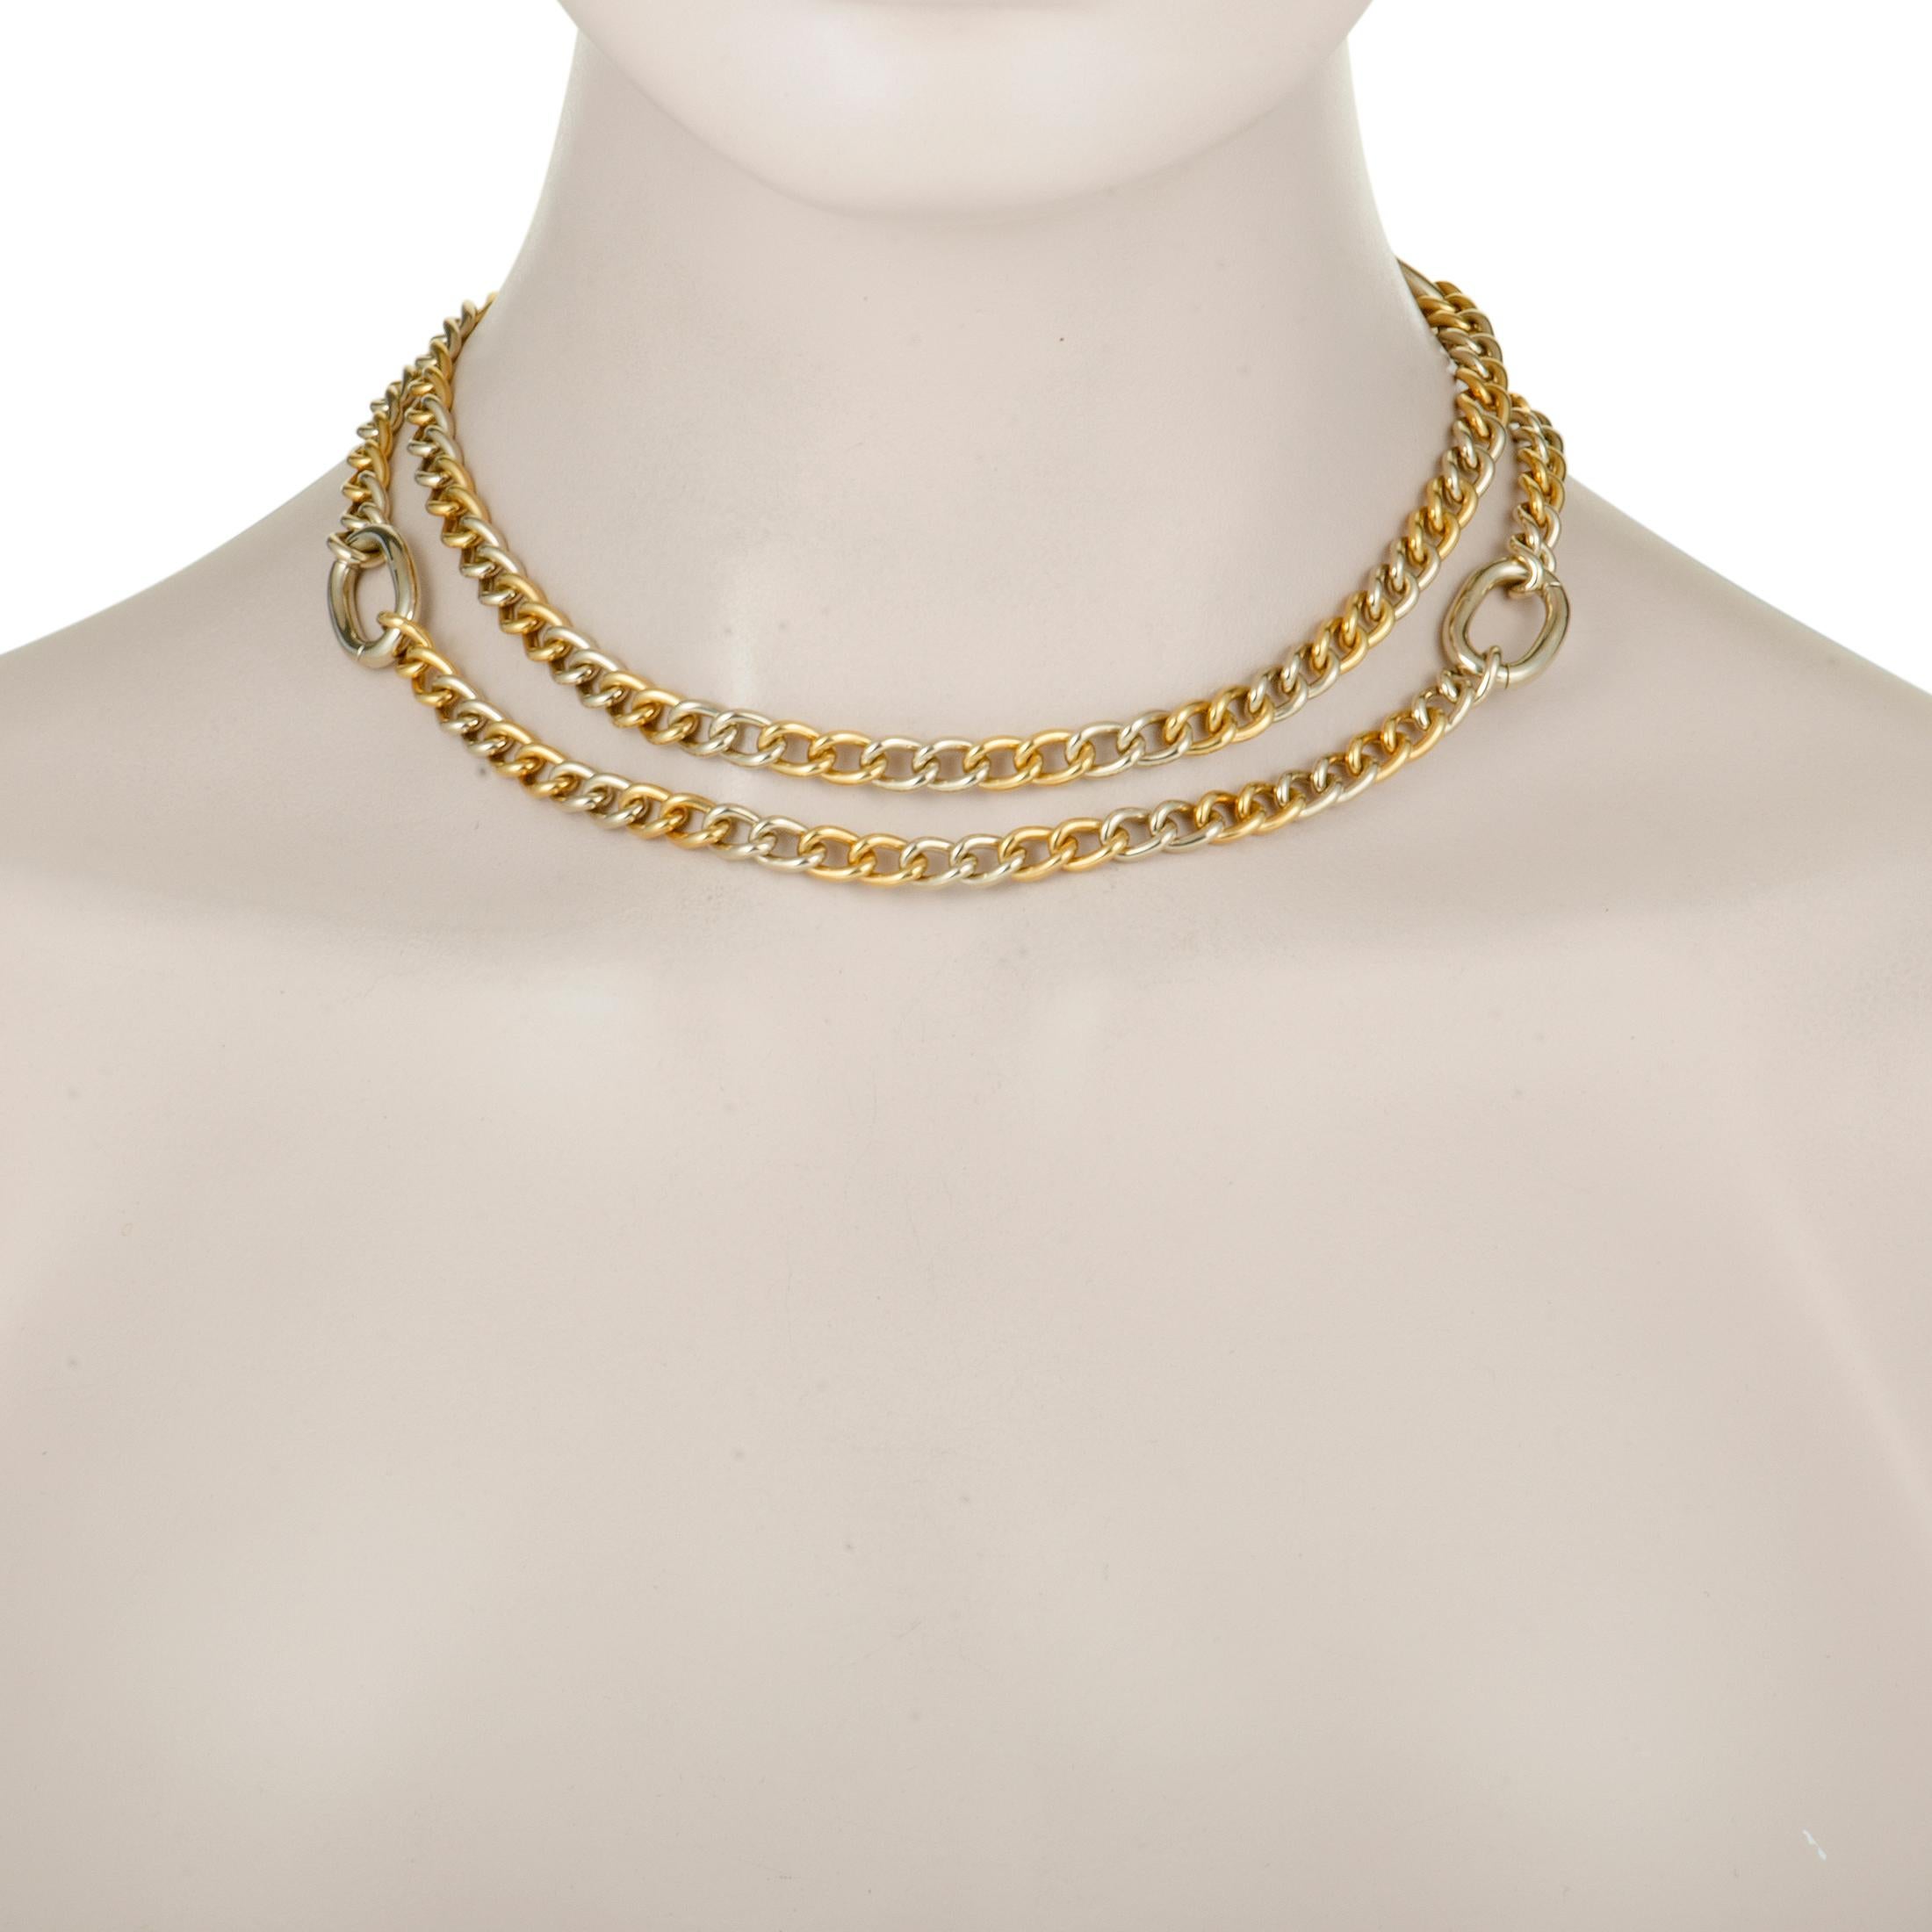 An exceptionally classic design is beautifully presented in prestigious gold in this fascinating necklace that is created by Pomellato, boasting exquisite craftsmanship quality. The necklace is made of 18K yellow and 18K white gold and weighs 149